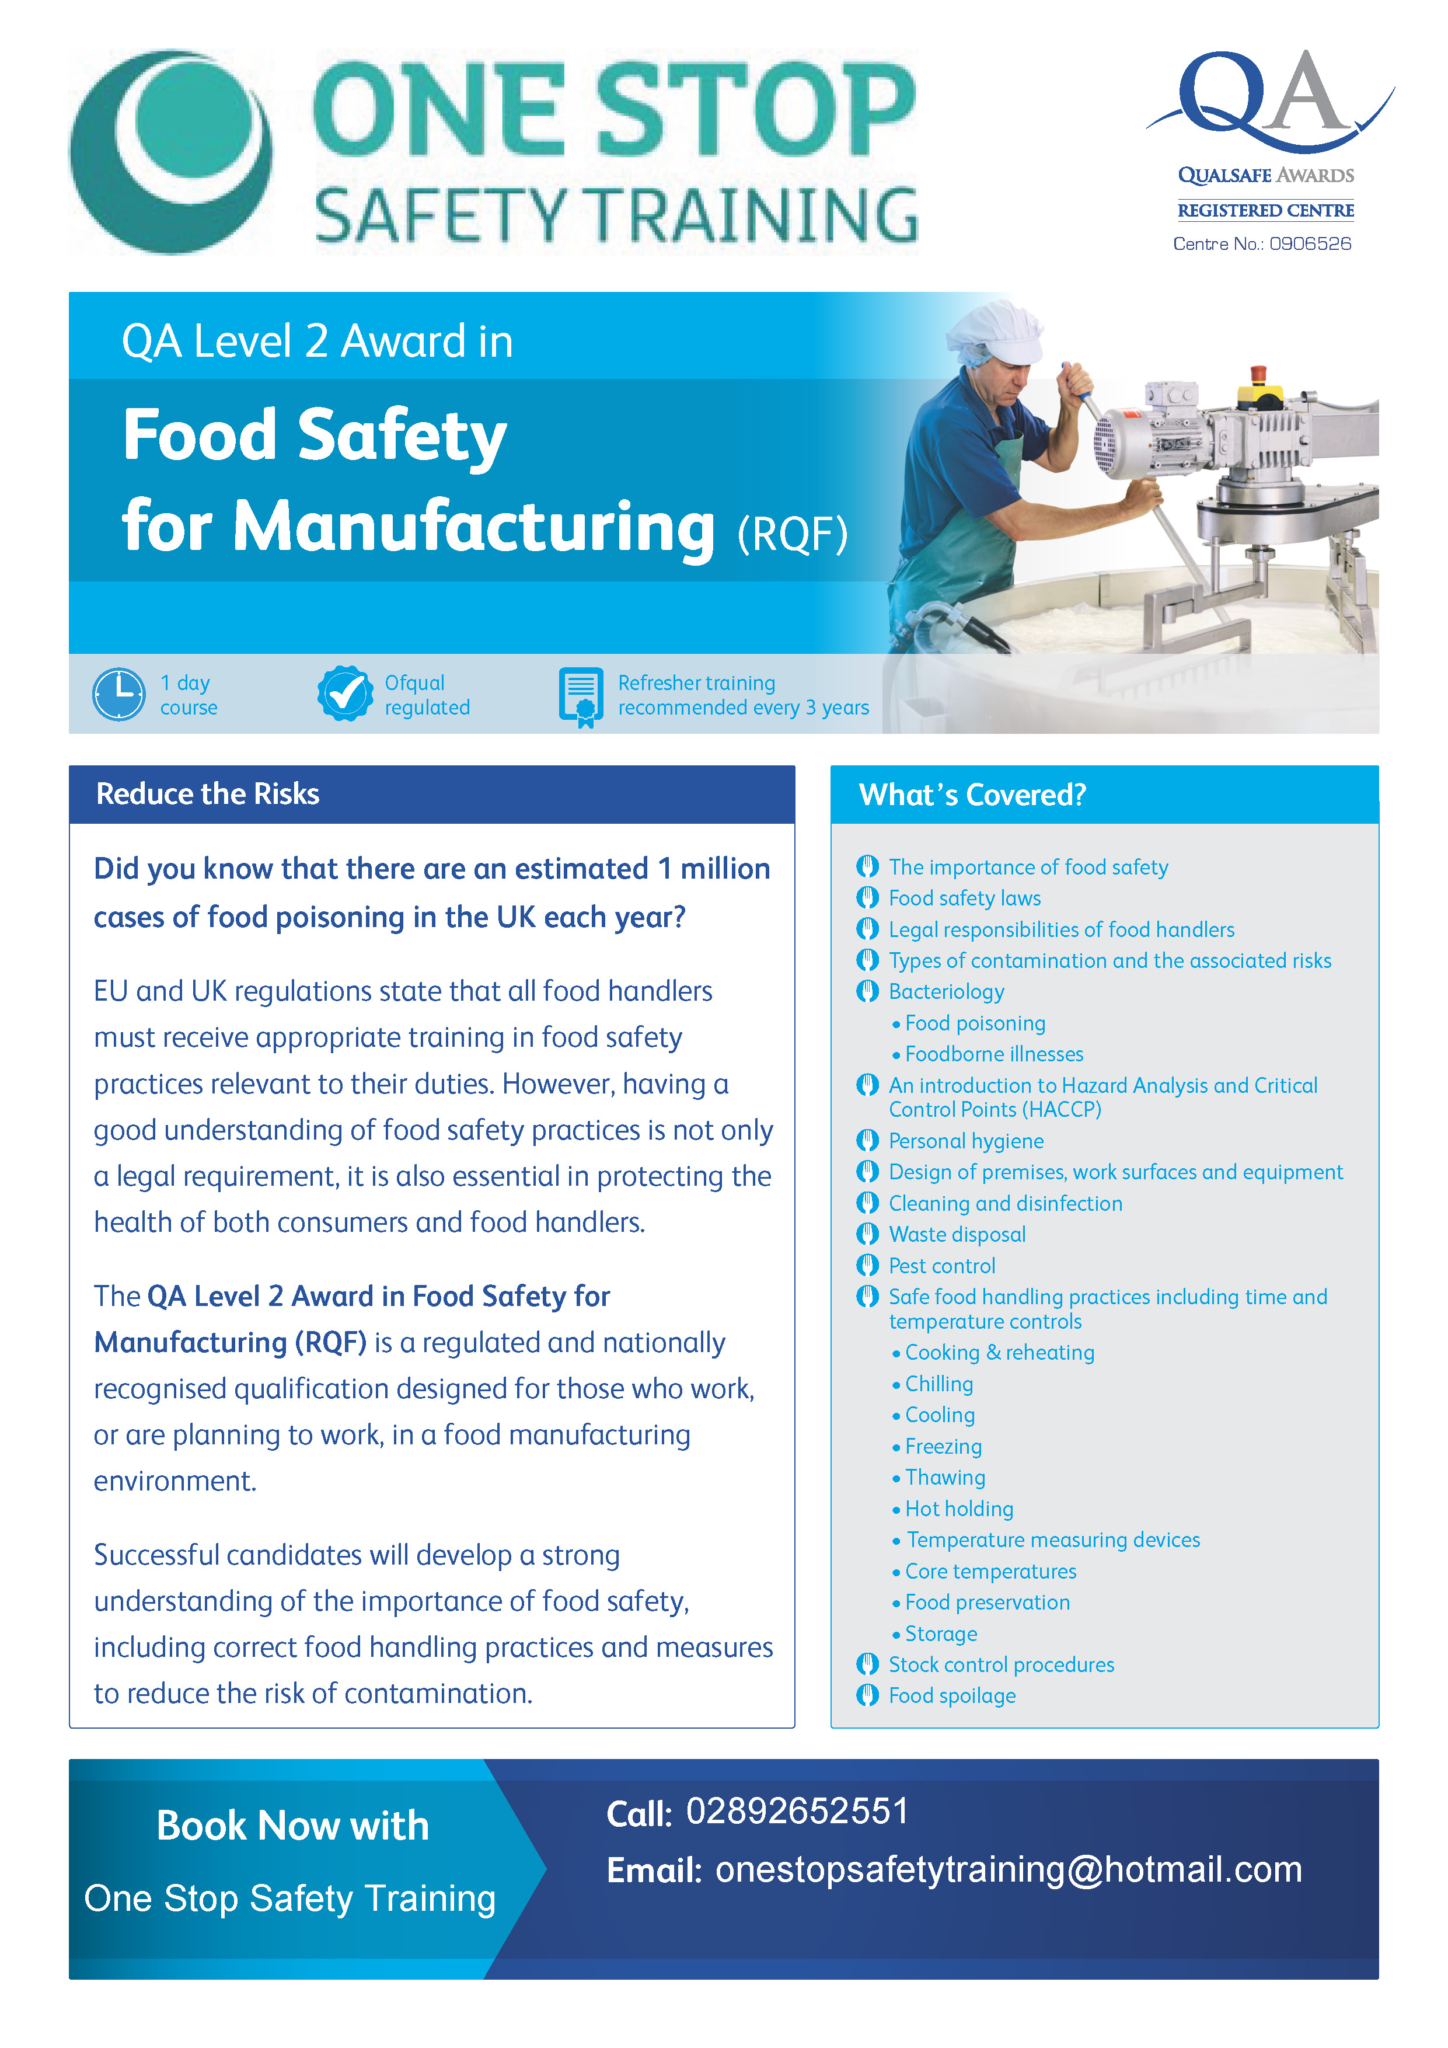 Food and safety training